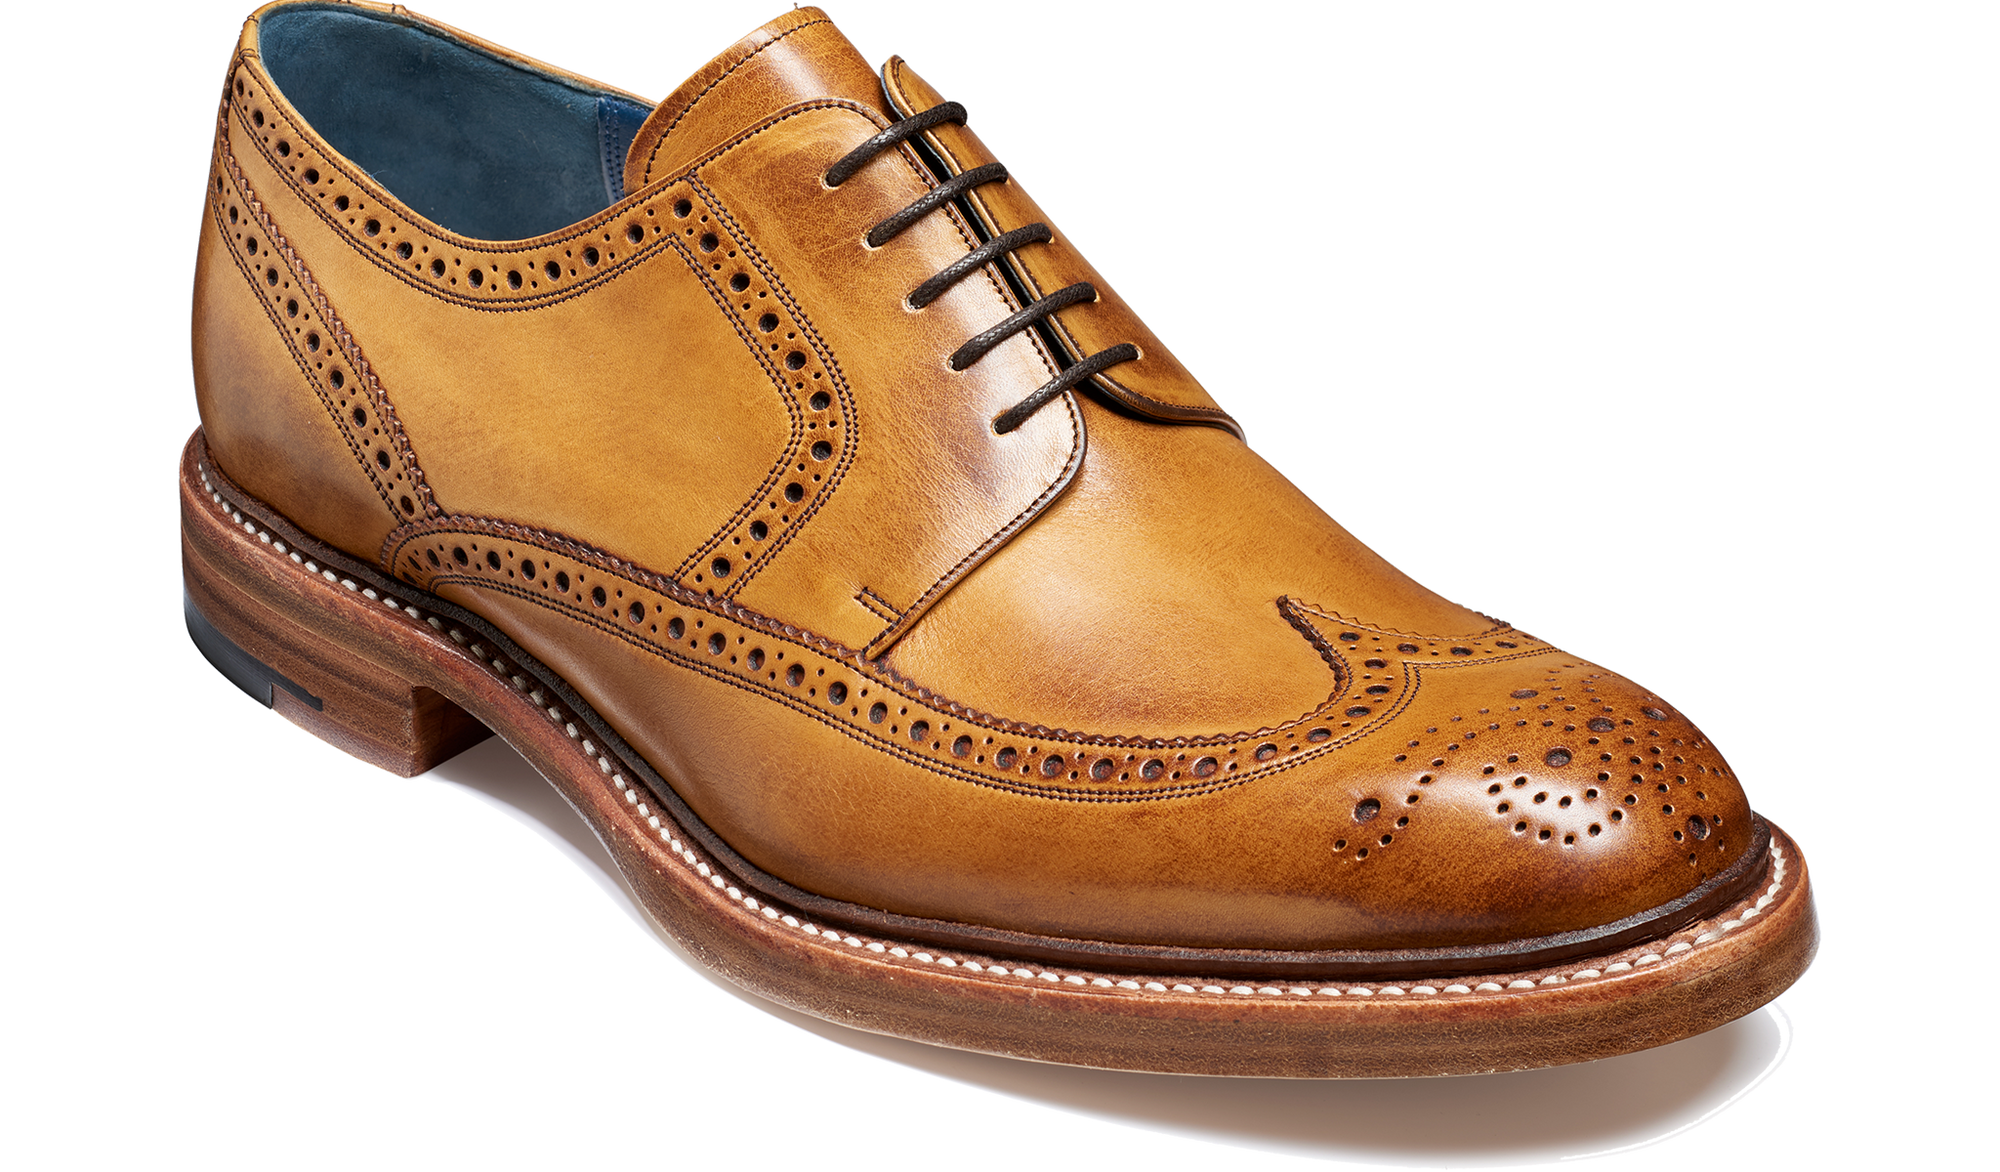 Barker Bailey Classic wing tip Derby - Cedar Hand Painted